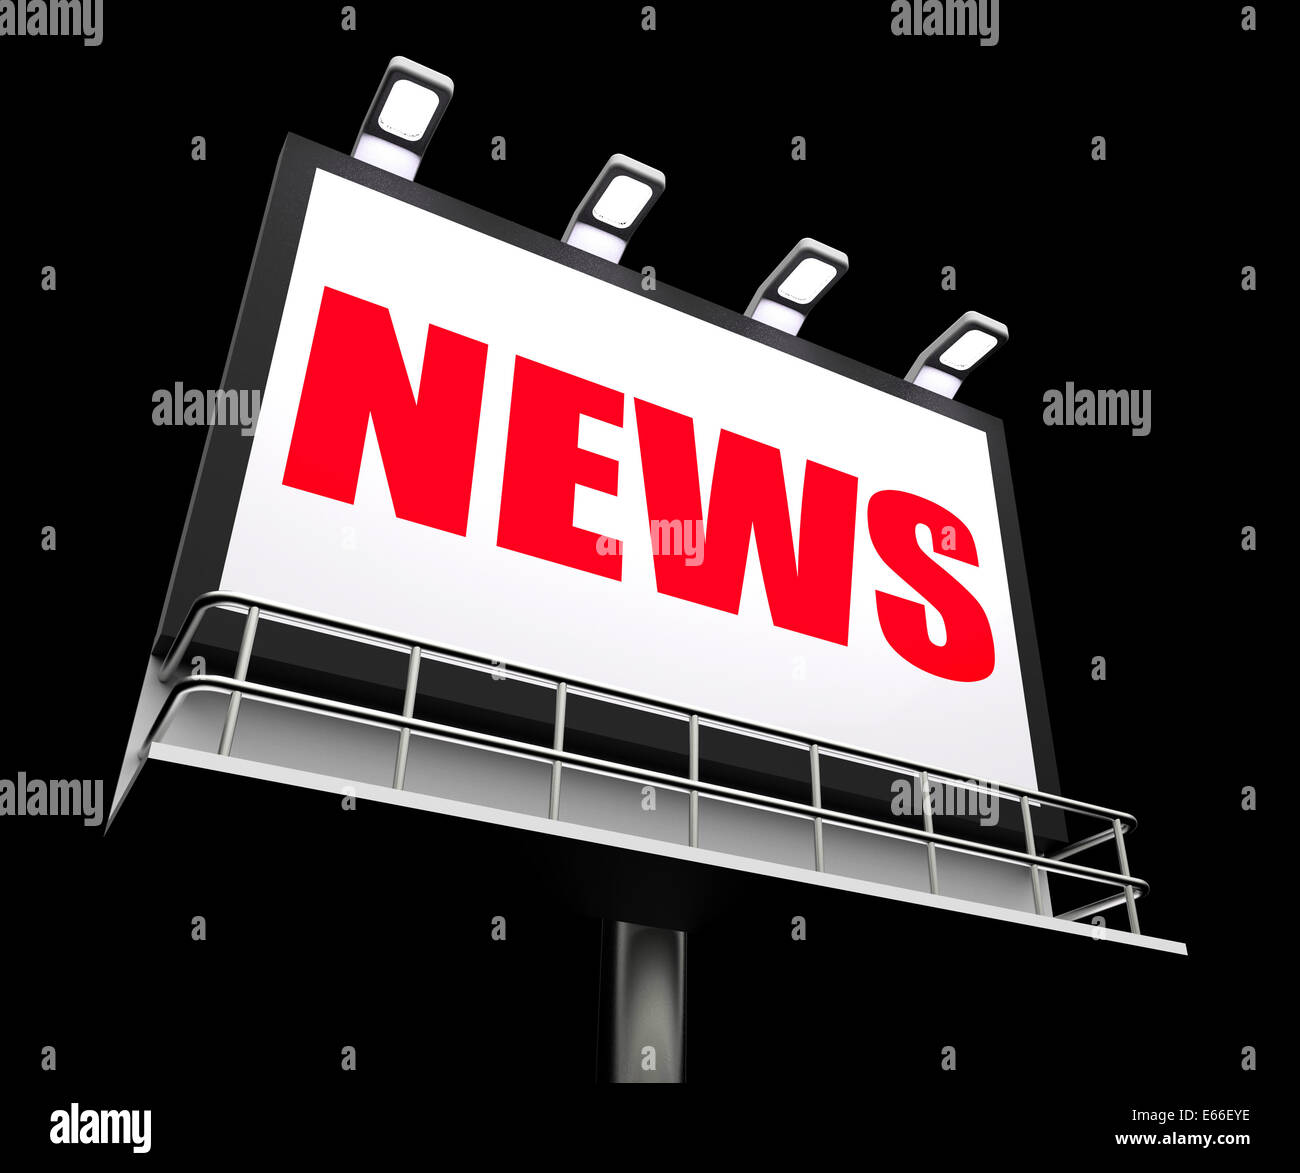 News Sign Representing Newspaper Articles and Headlines or Media Info Stock Photo